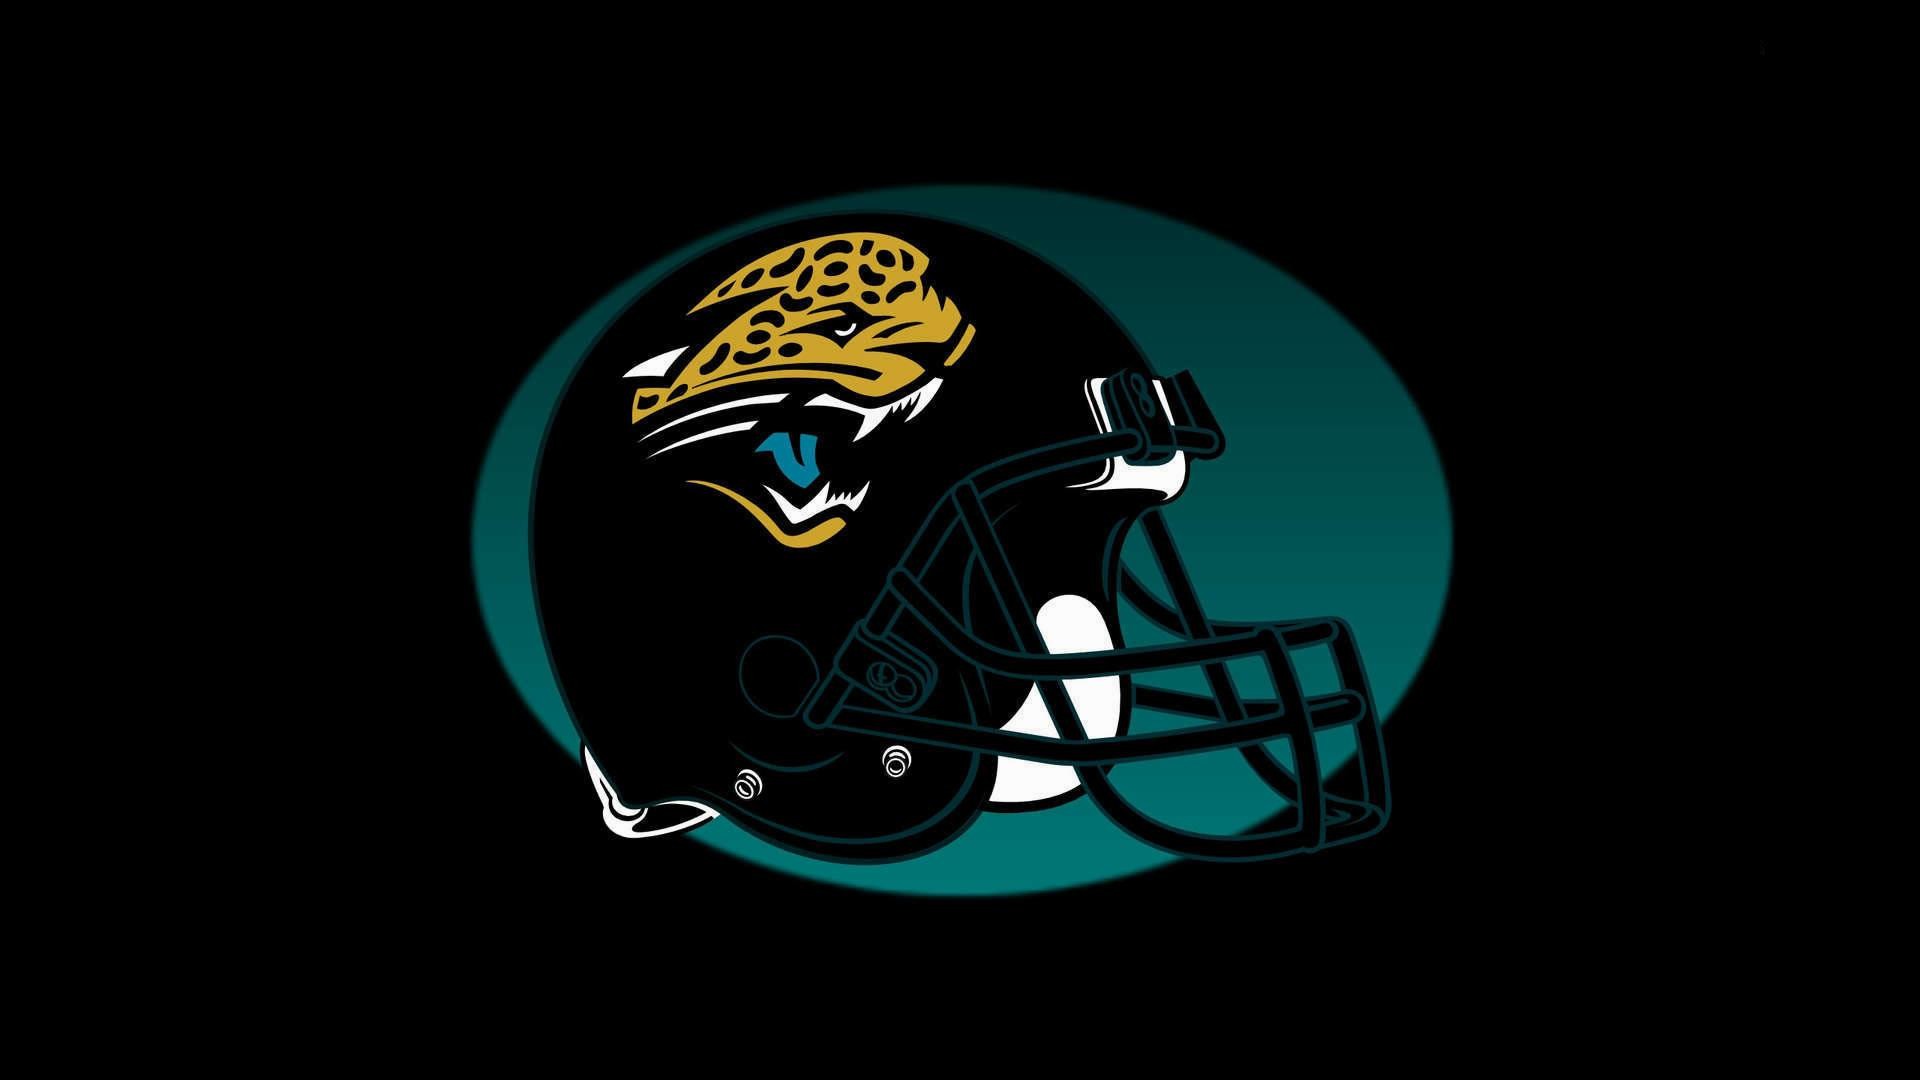 Wallpaper Desktop Jacksonville Jaguars HD with resolution 1920x1080 pixel. You can make this wallpaper for your Mac or Windows Desktop Background, iPhone, Android or Tablet and another Smartphone device